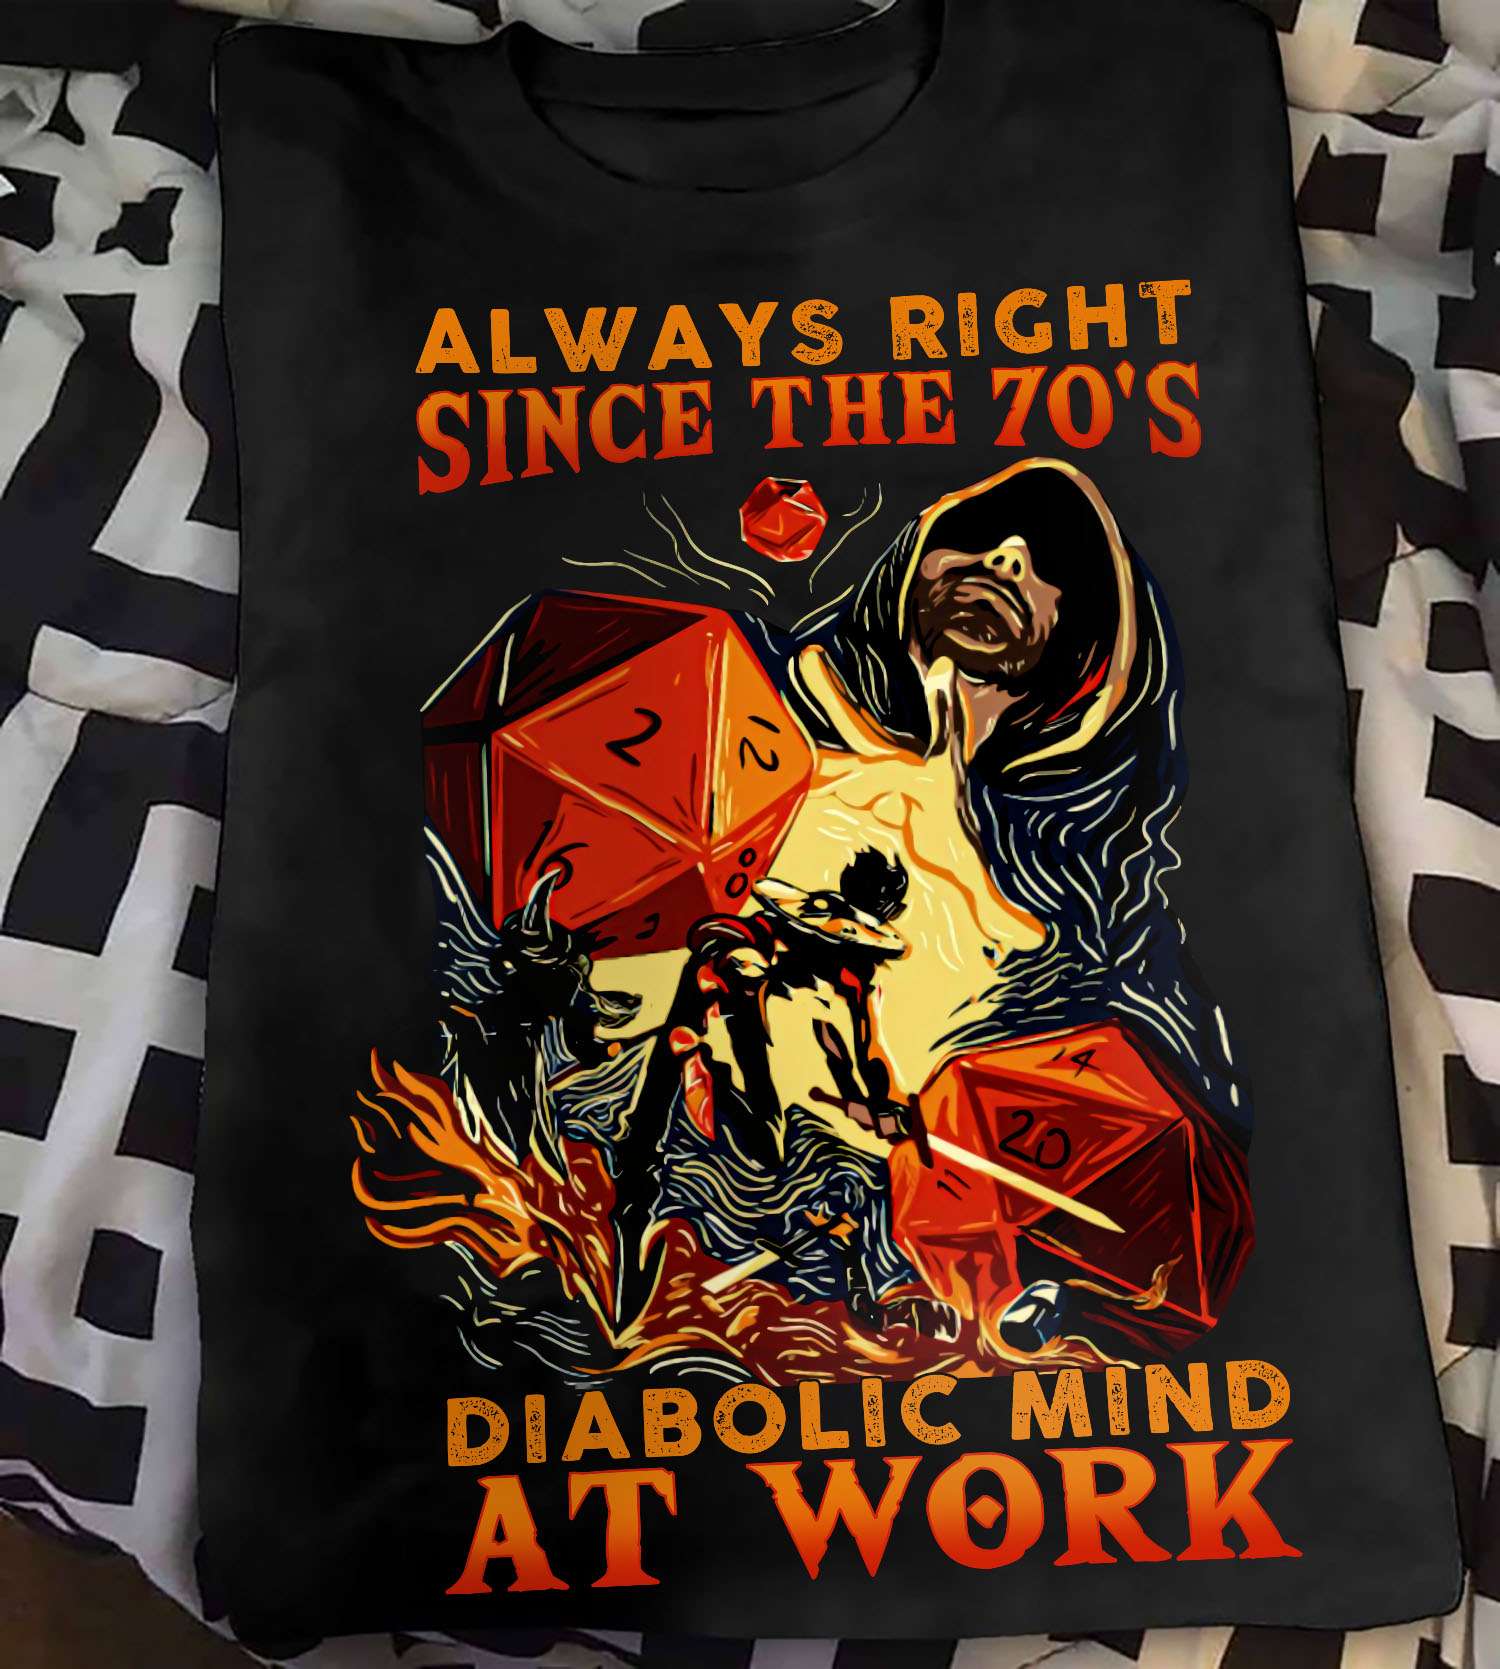 Always tight since the 70's diabolic mind at work - Dungeons And Dragons